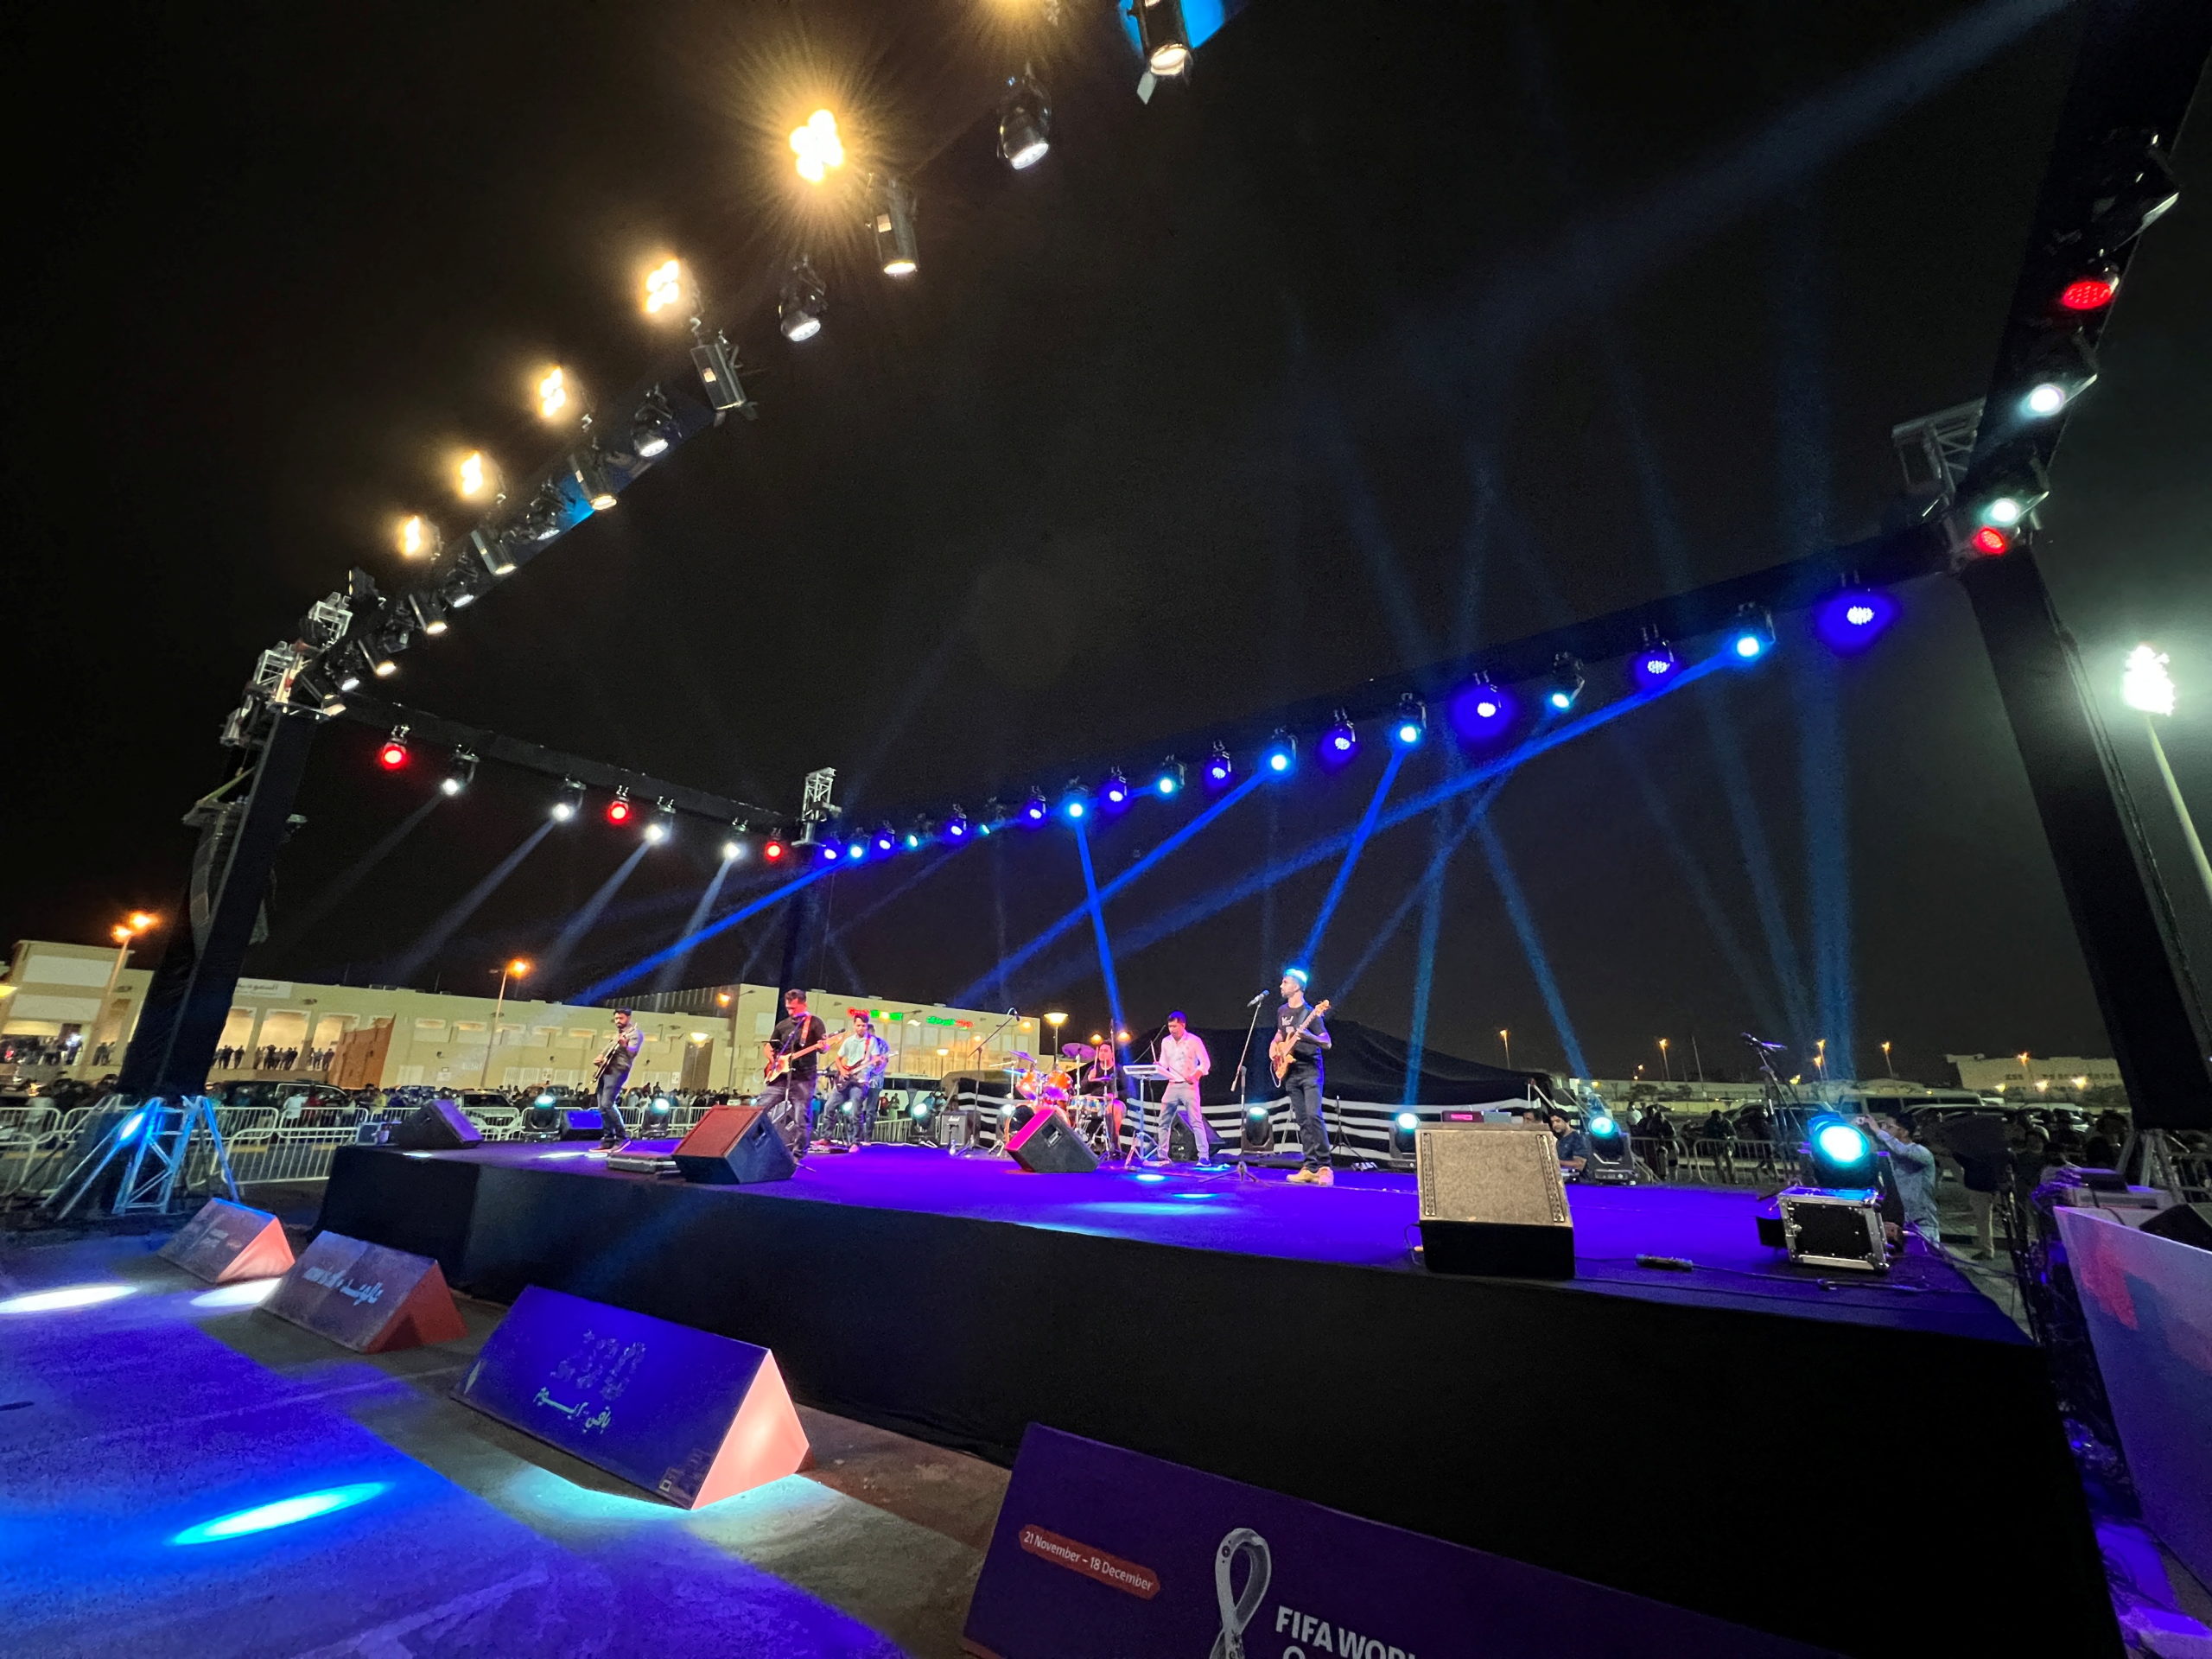 FILE PHOTO: A band performs on stage during an event marking "200 Days To Go" ahead of the 2022 FIFA World Cup, in Doha, Qatar May 6, 2022.